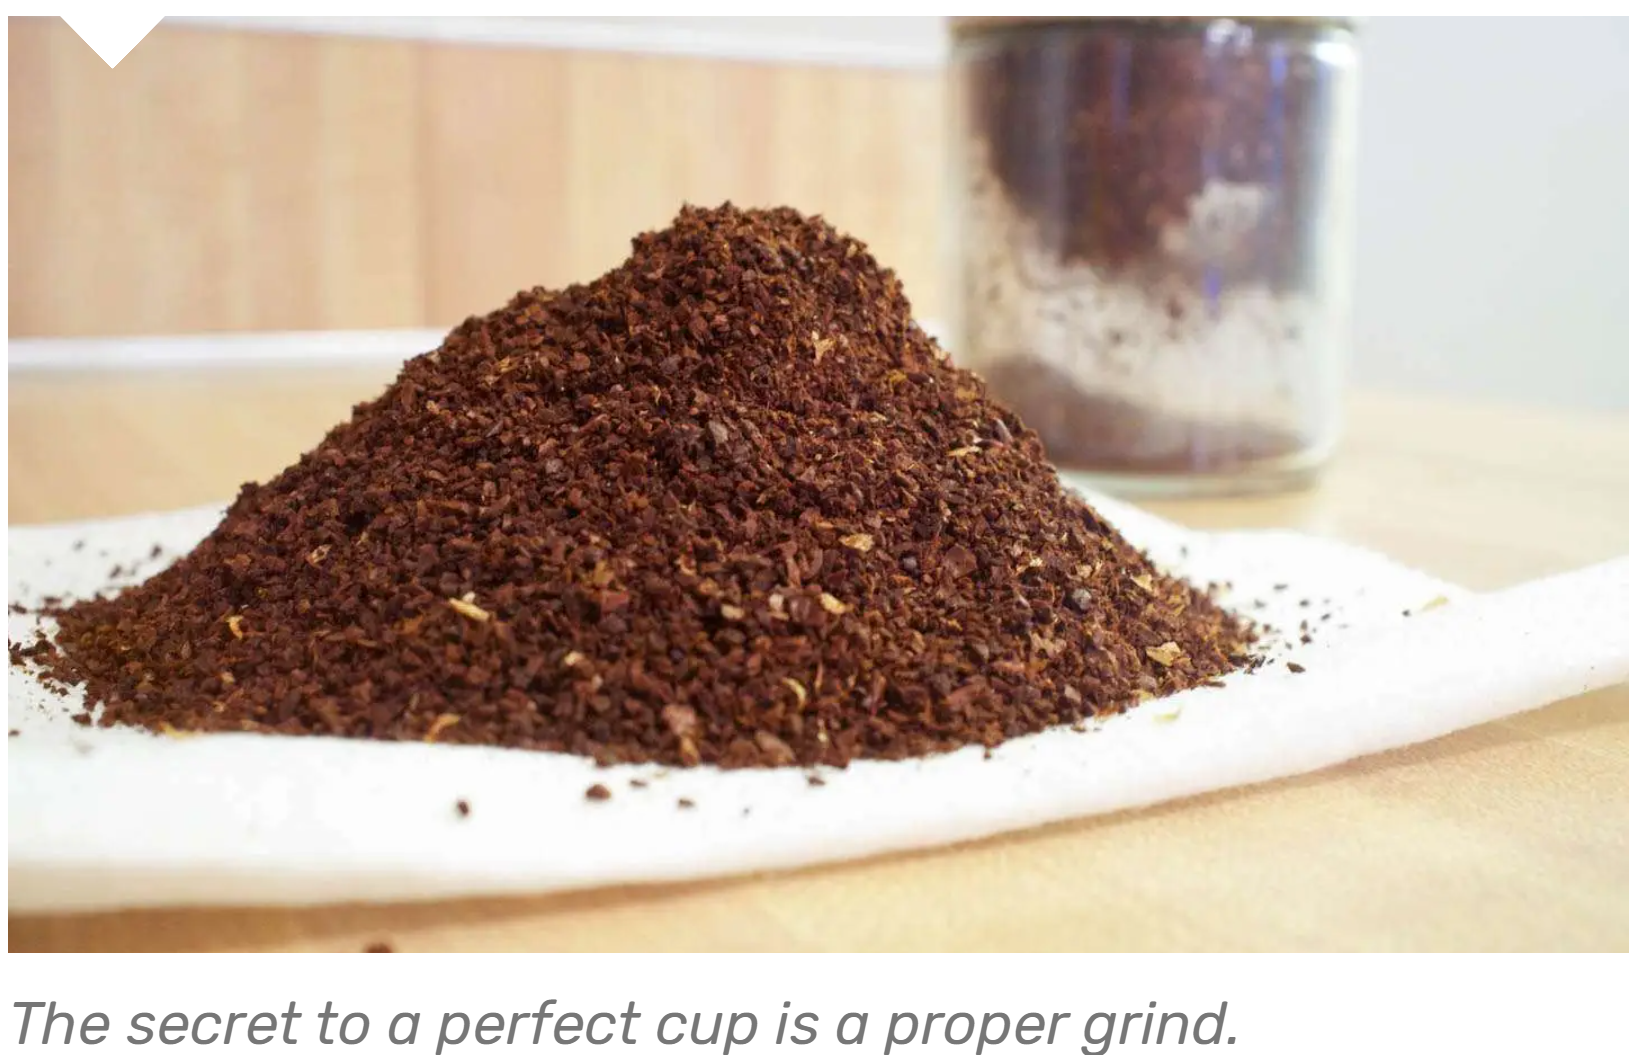 Grinding Coffee - See The Complete Guide to grinding Coffee